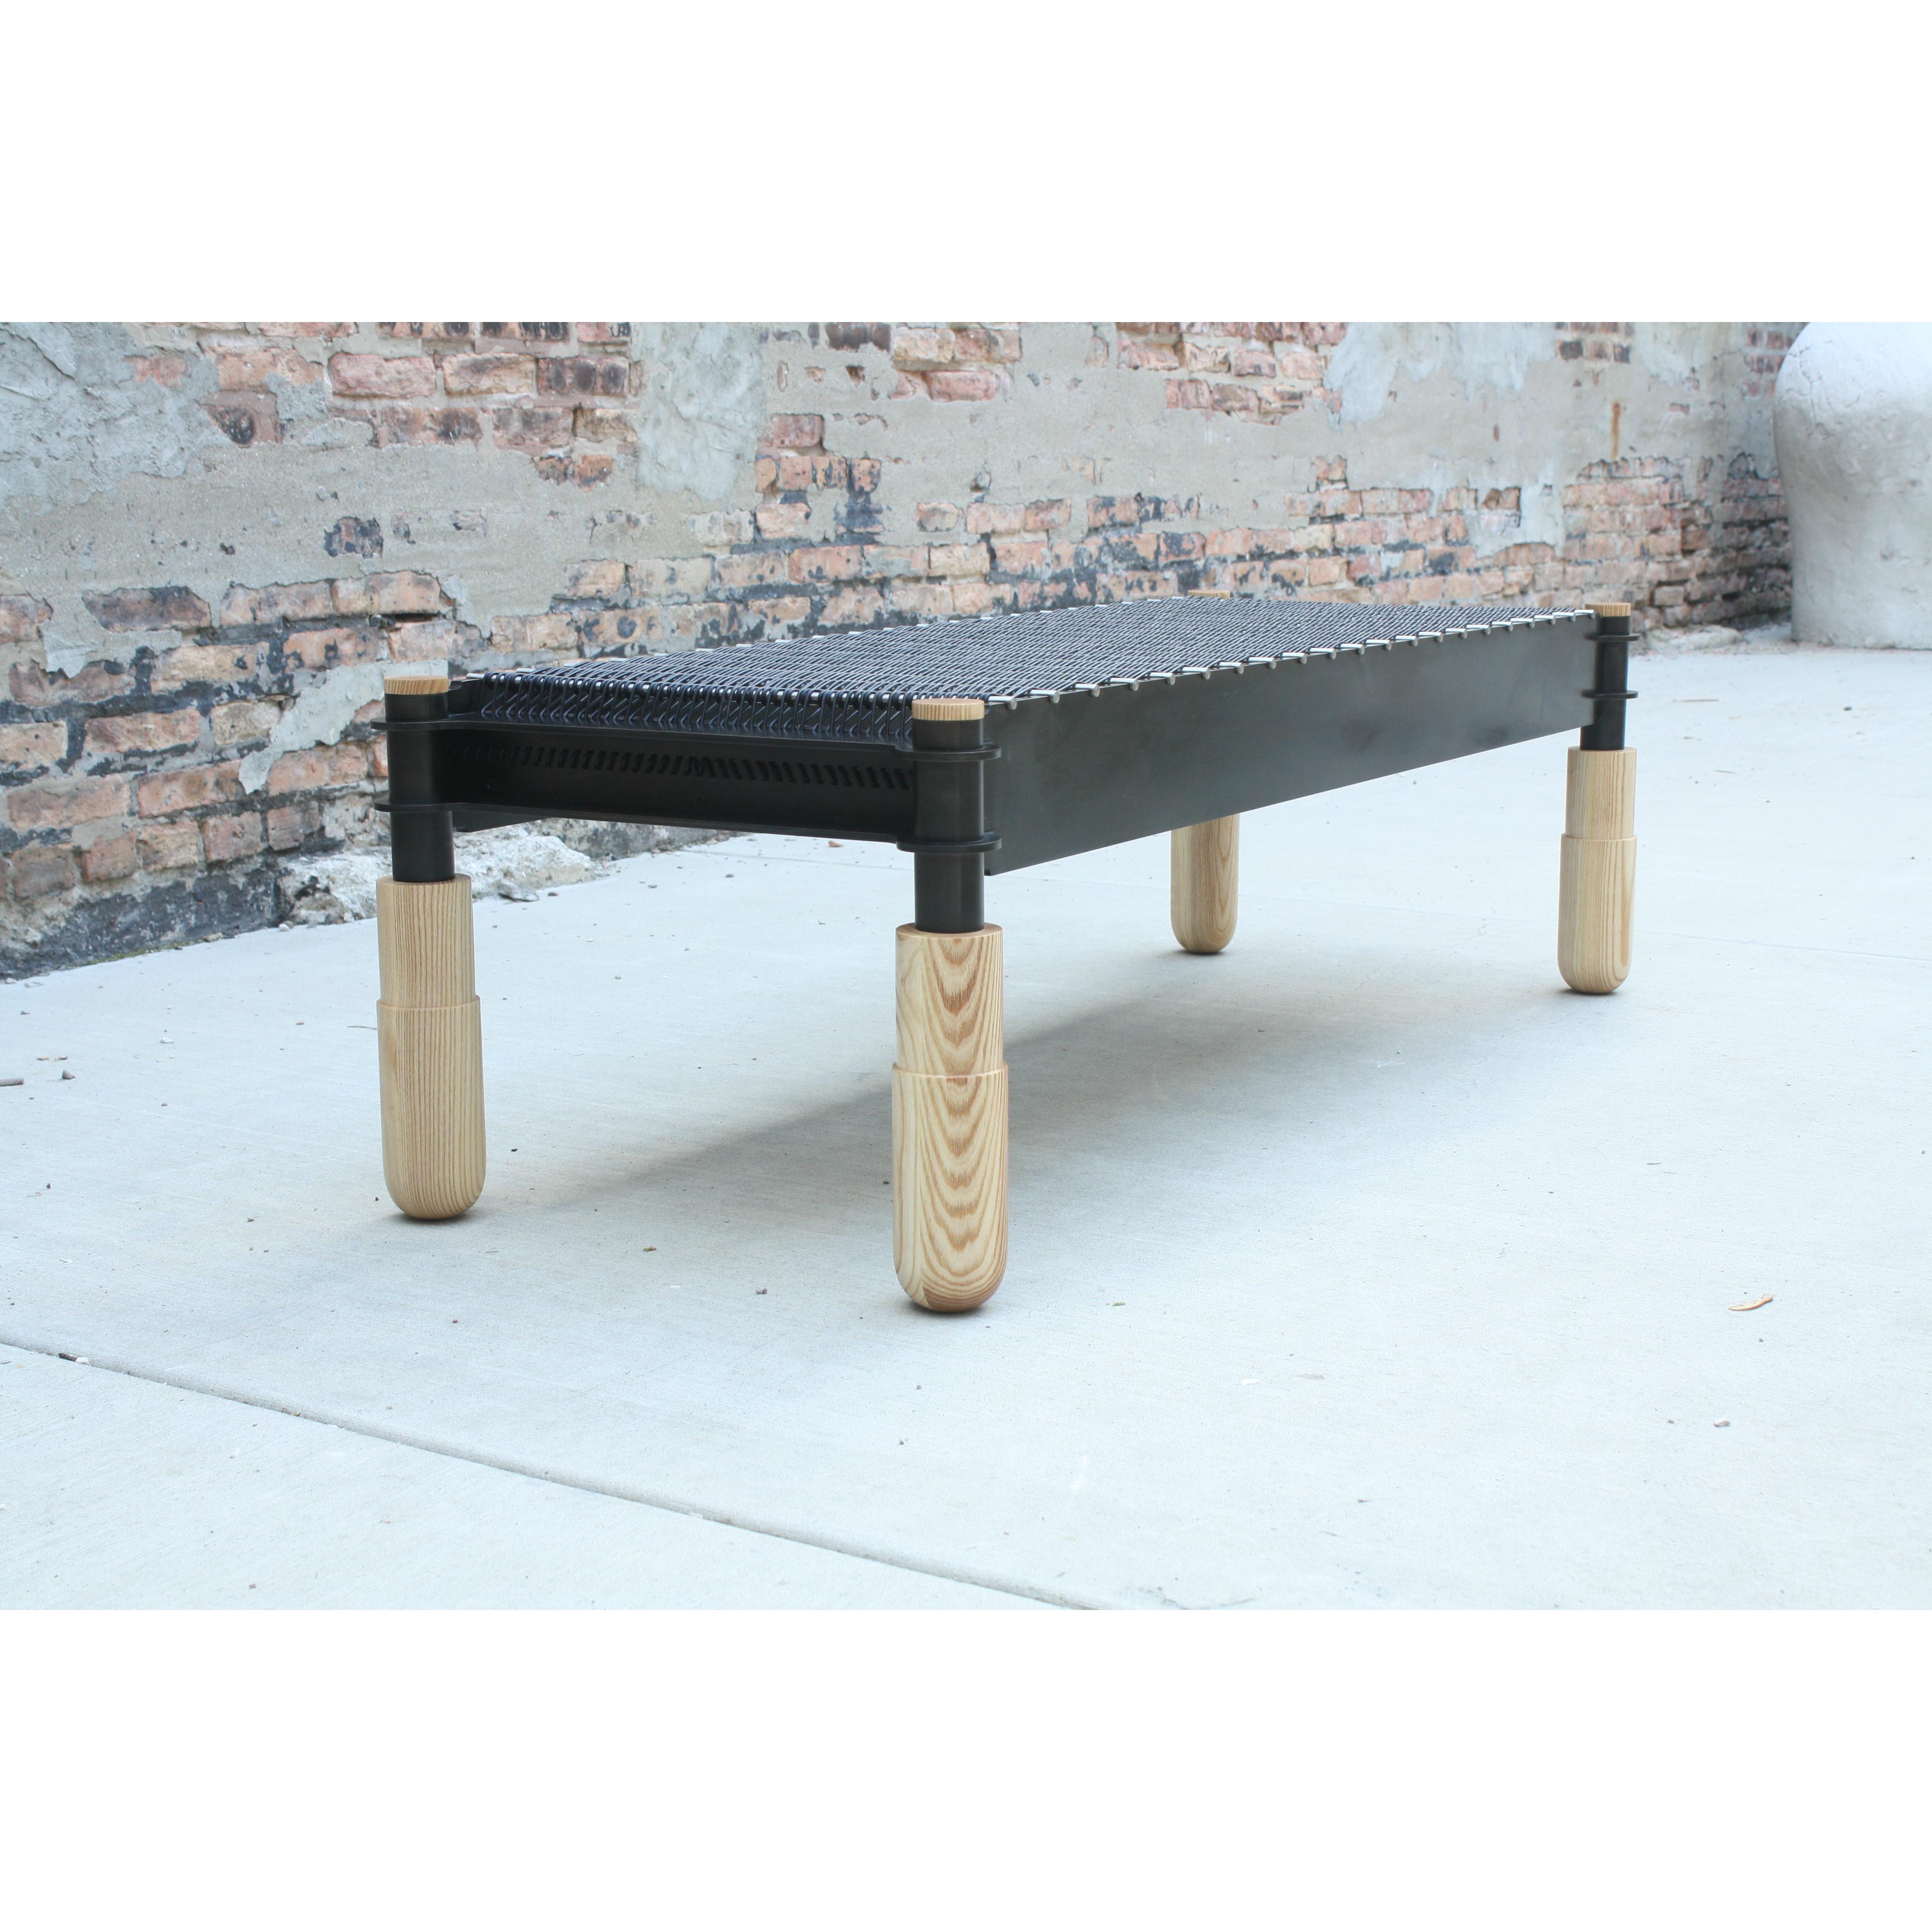 Shown in blackened steel, brushed stainless, oiled ash, and black leather.

This handmade bench features interlocking joinery executed in steel supported by hand-turned solid wood legs. Leather cord is woven through brushed stainless dowels and